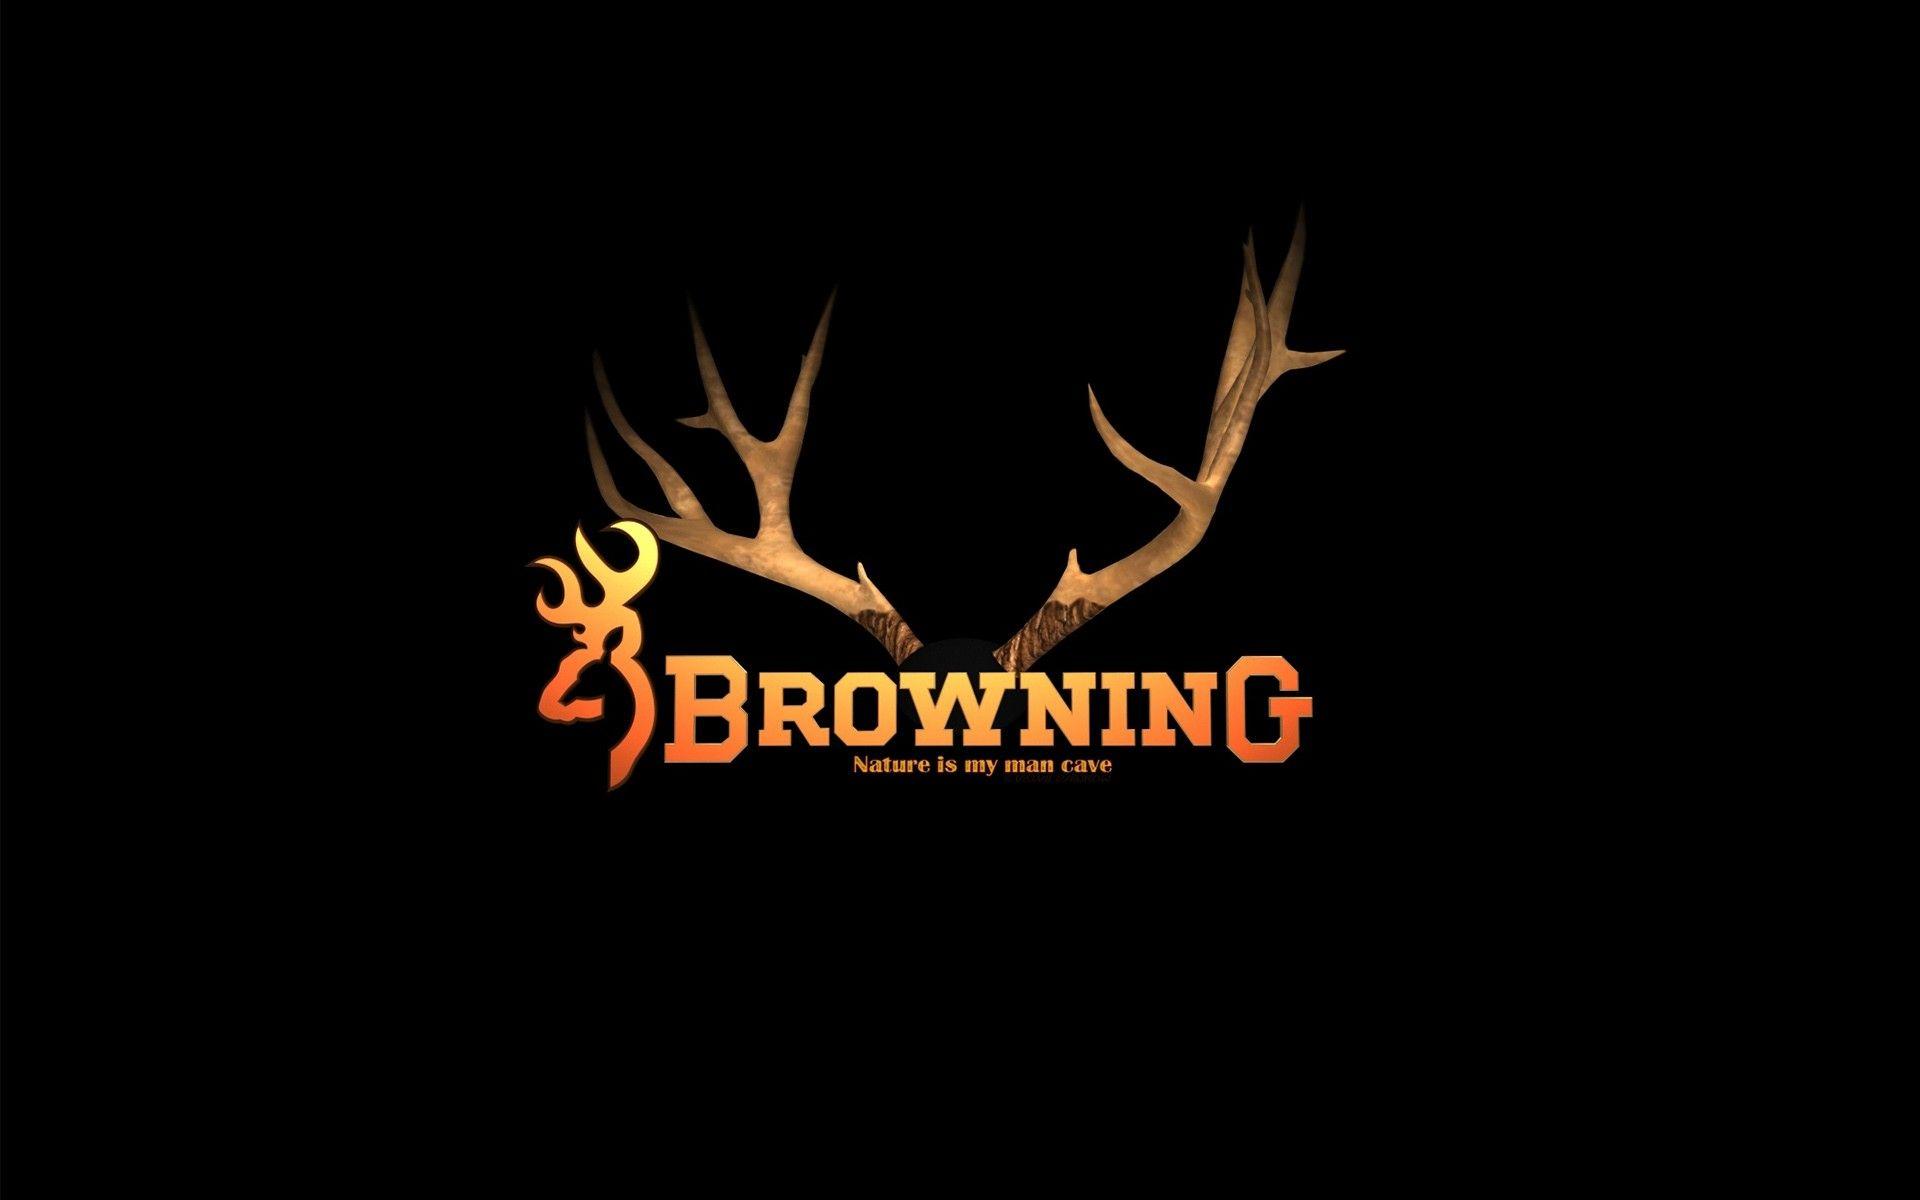 Browning Logo Wallpaper for iPhone